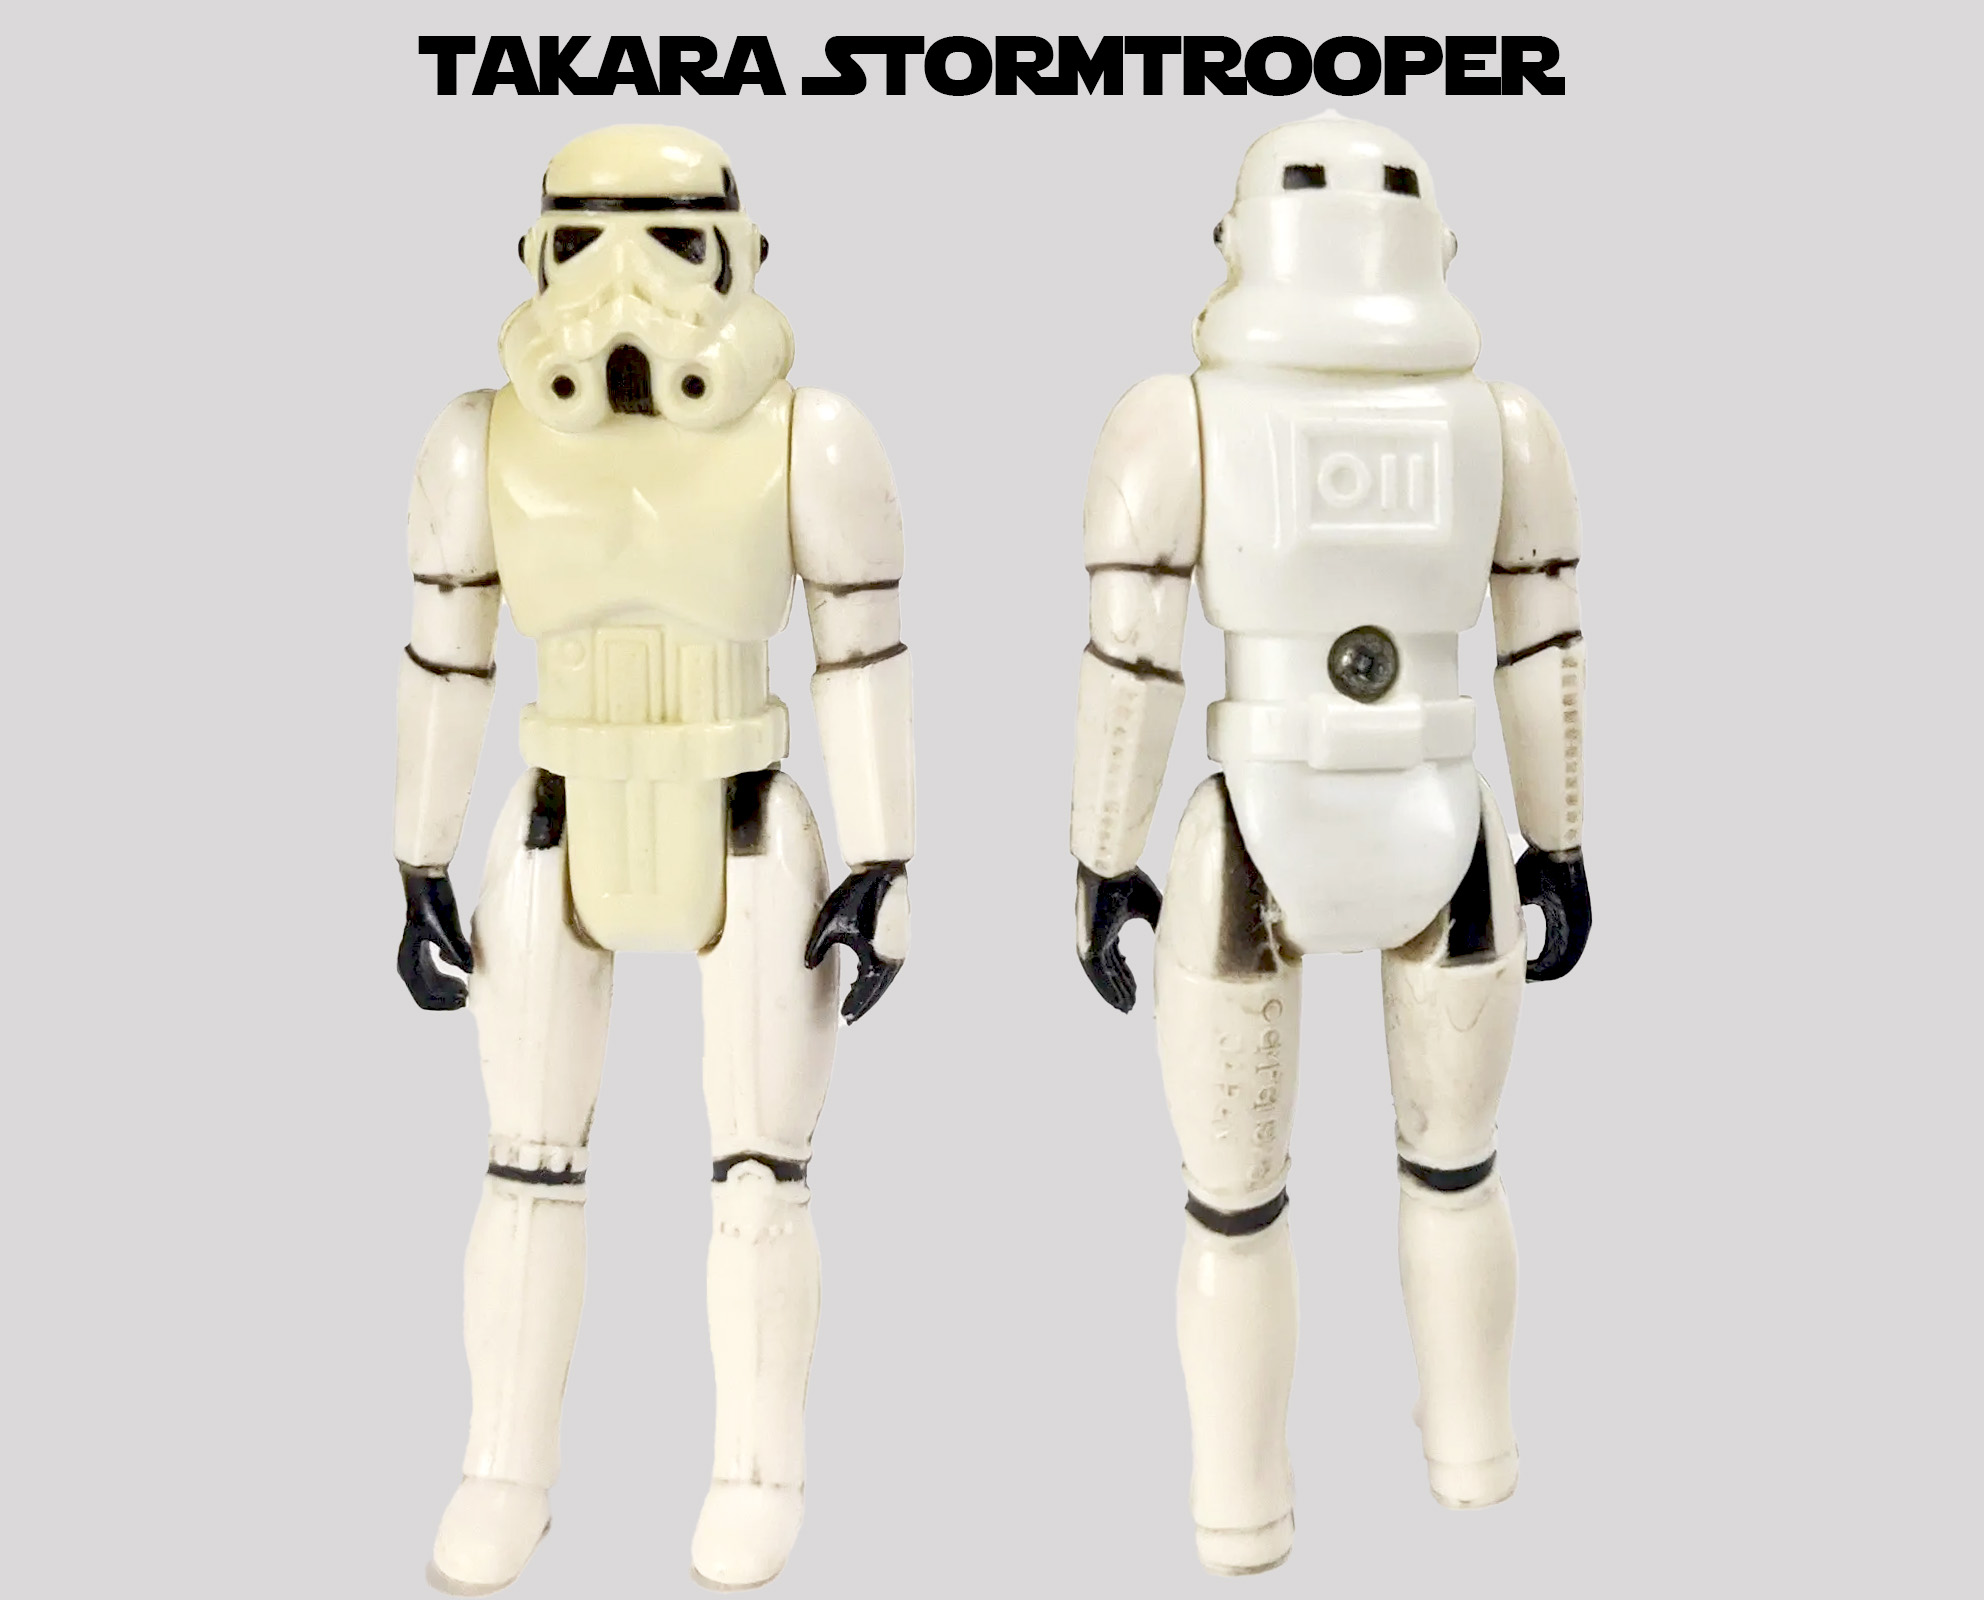 The Takara Stormtrooper is very rare and will be very expensive.